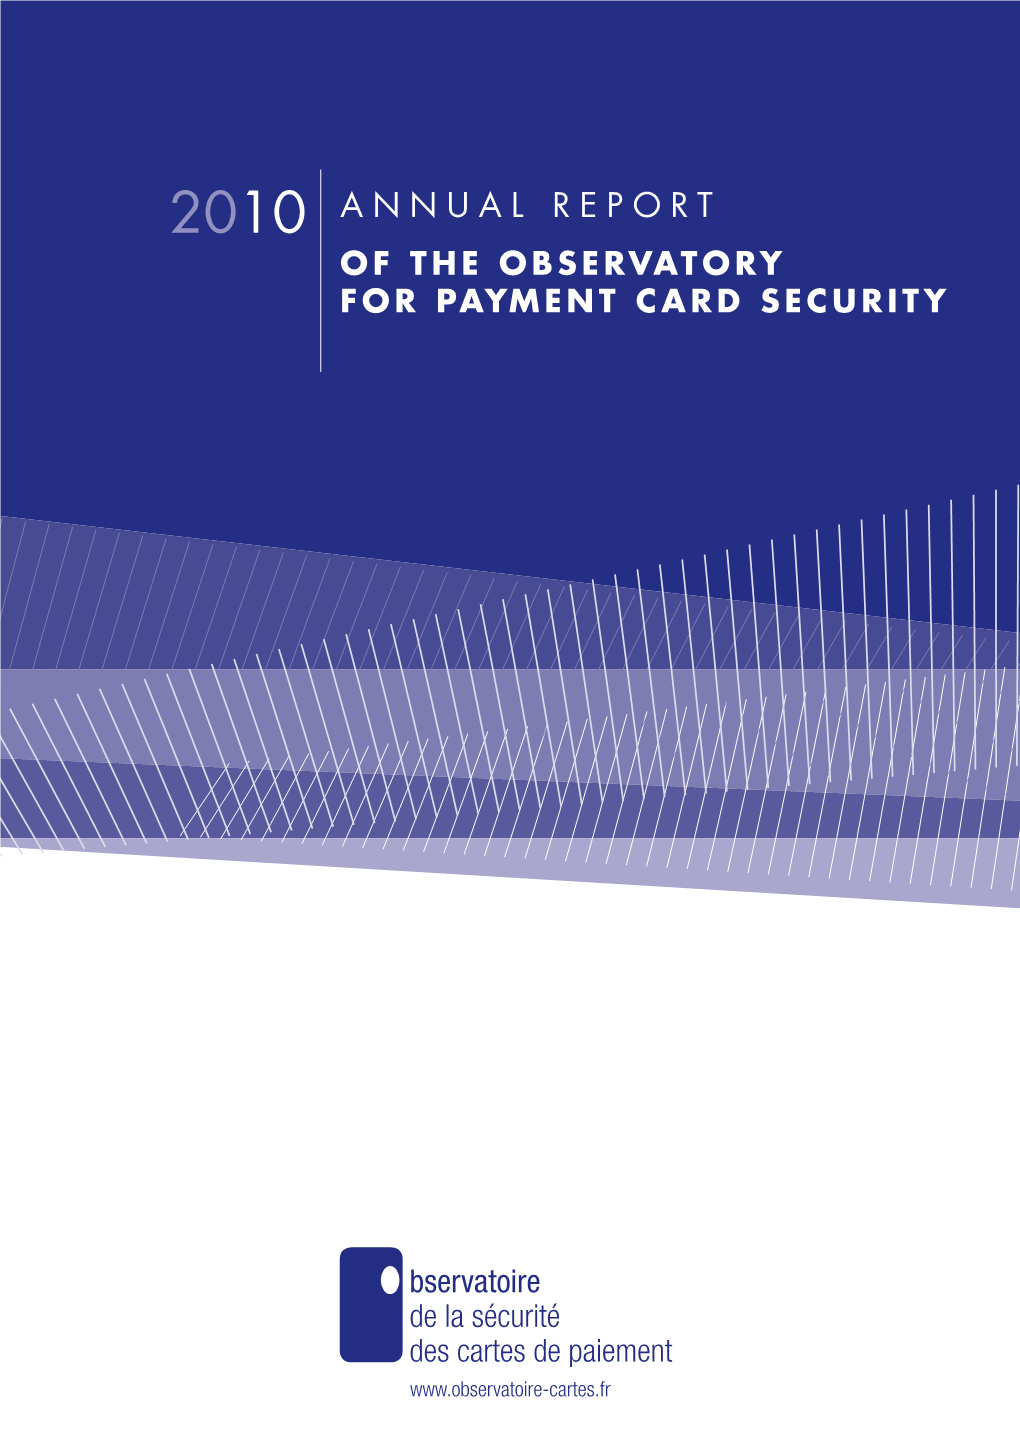 Annual Report 2010 of the of the Observatory for Payment Card Security